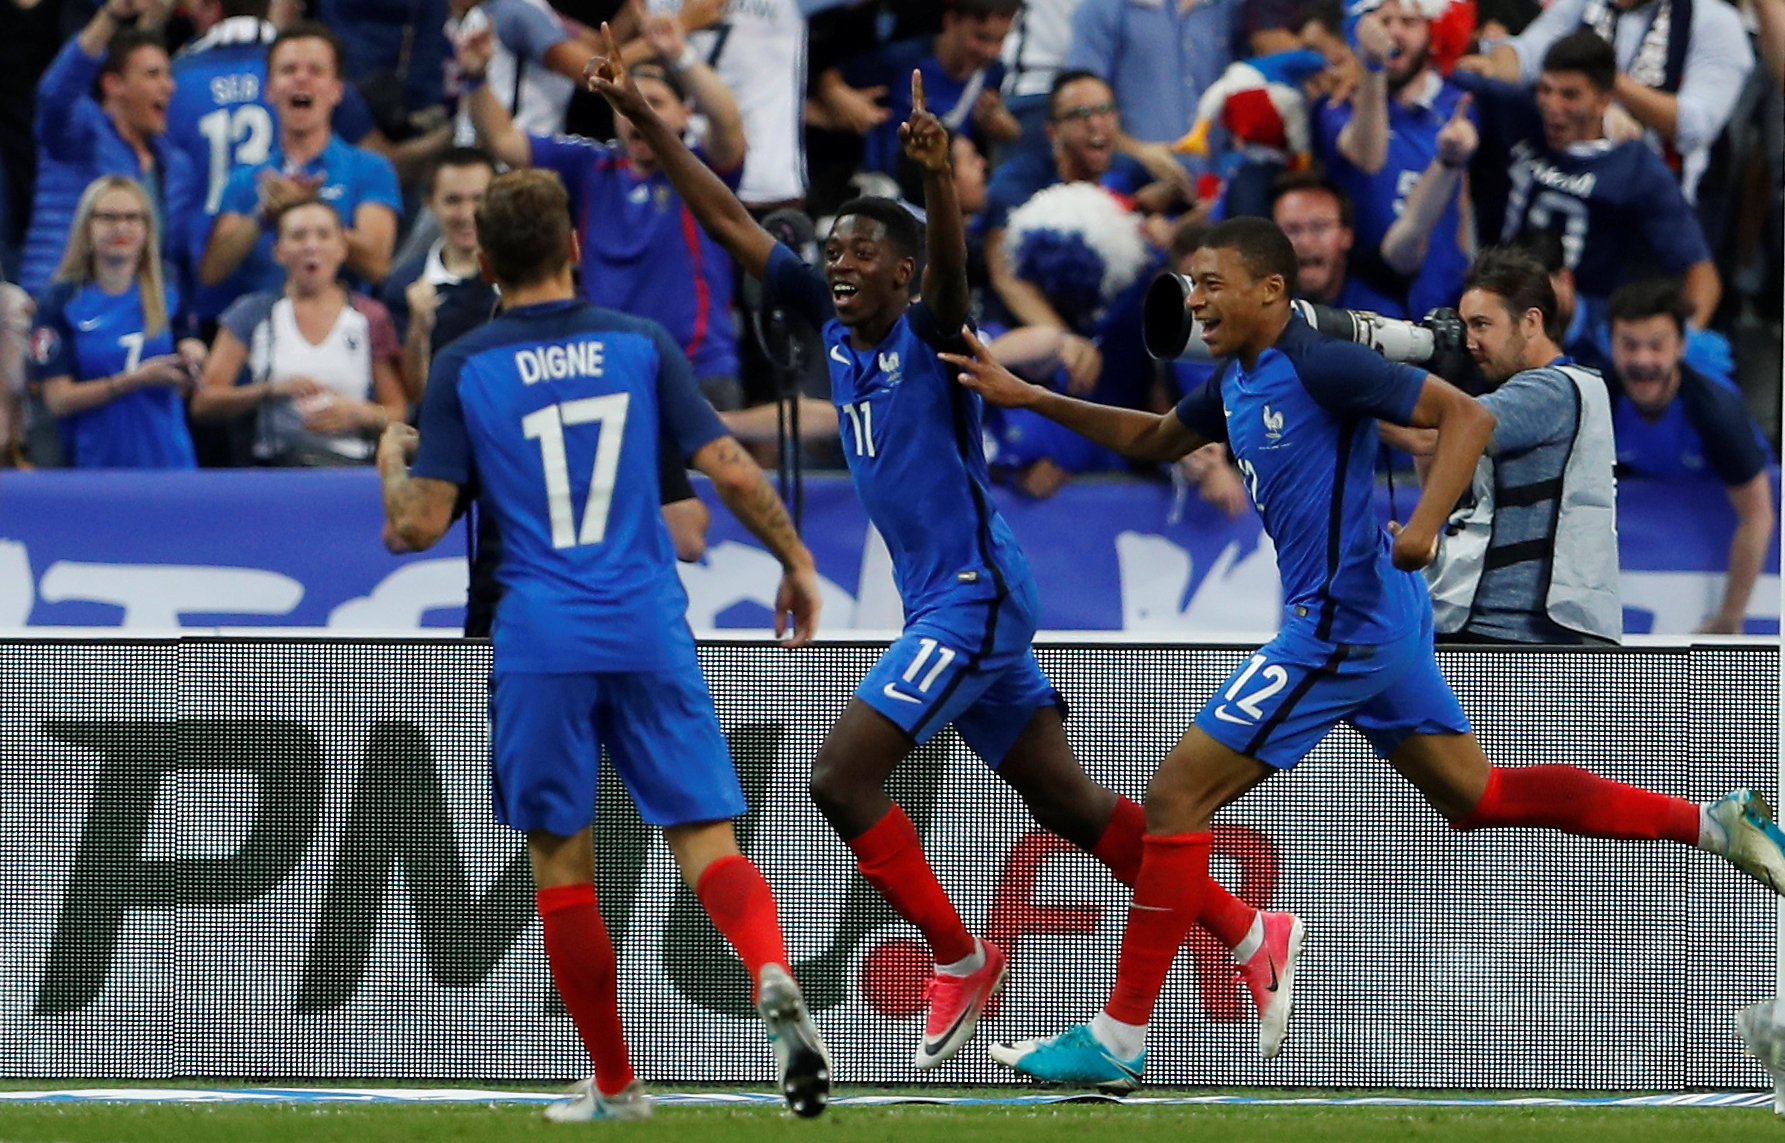 Football: Ten-man France down England in lively friendly